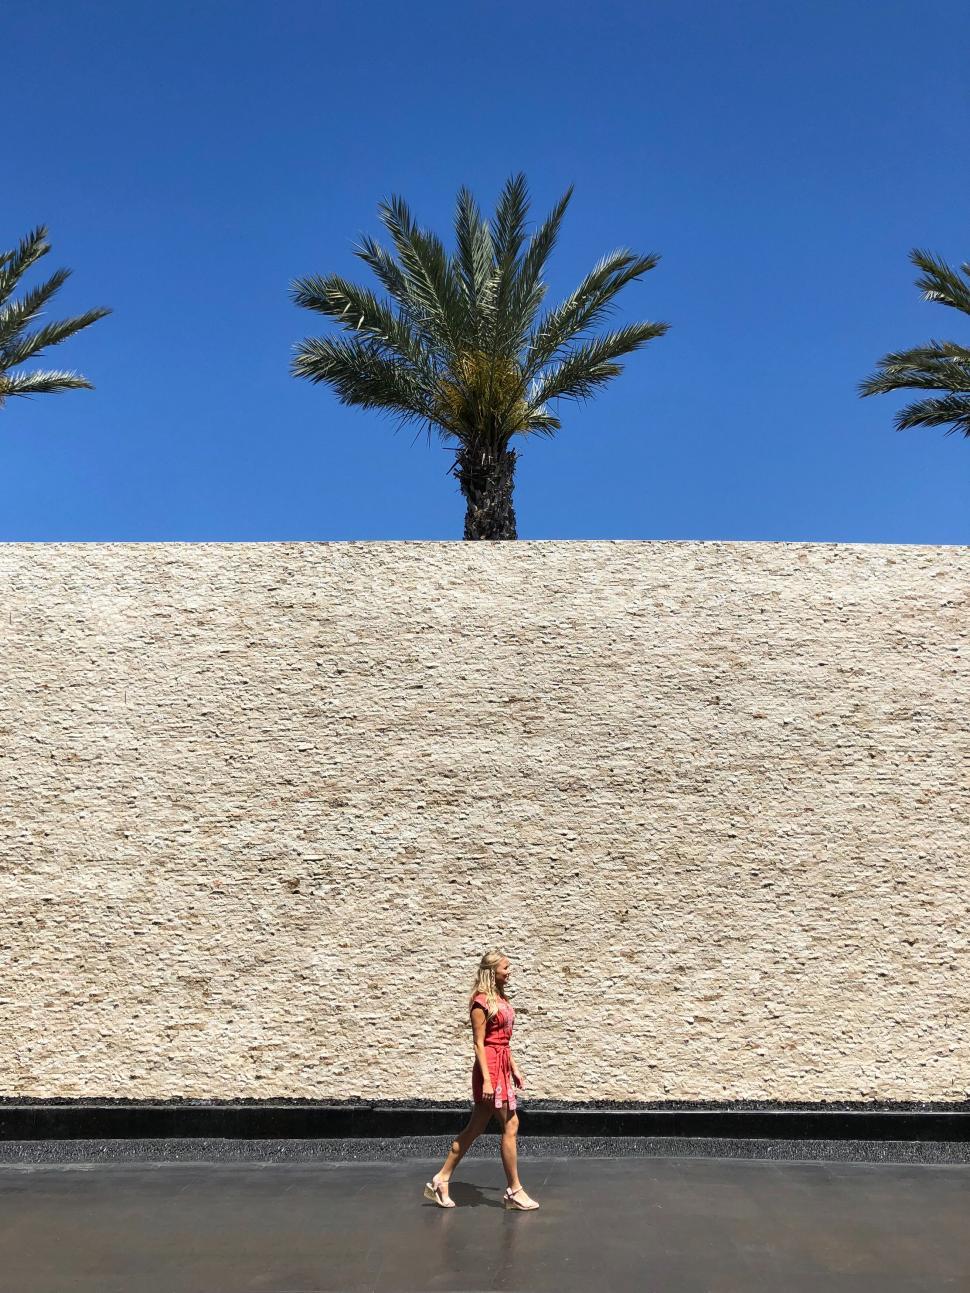 Free Image of Woman walking by a palm tree and stone wall 